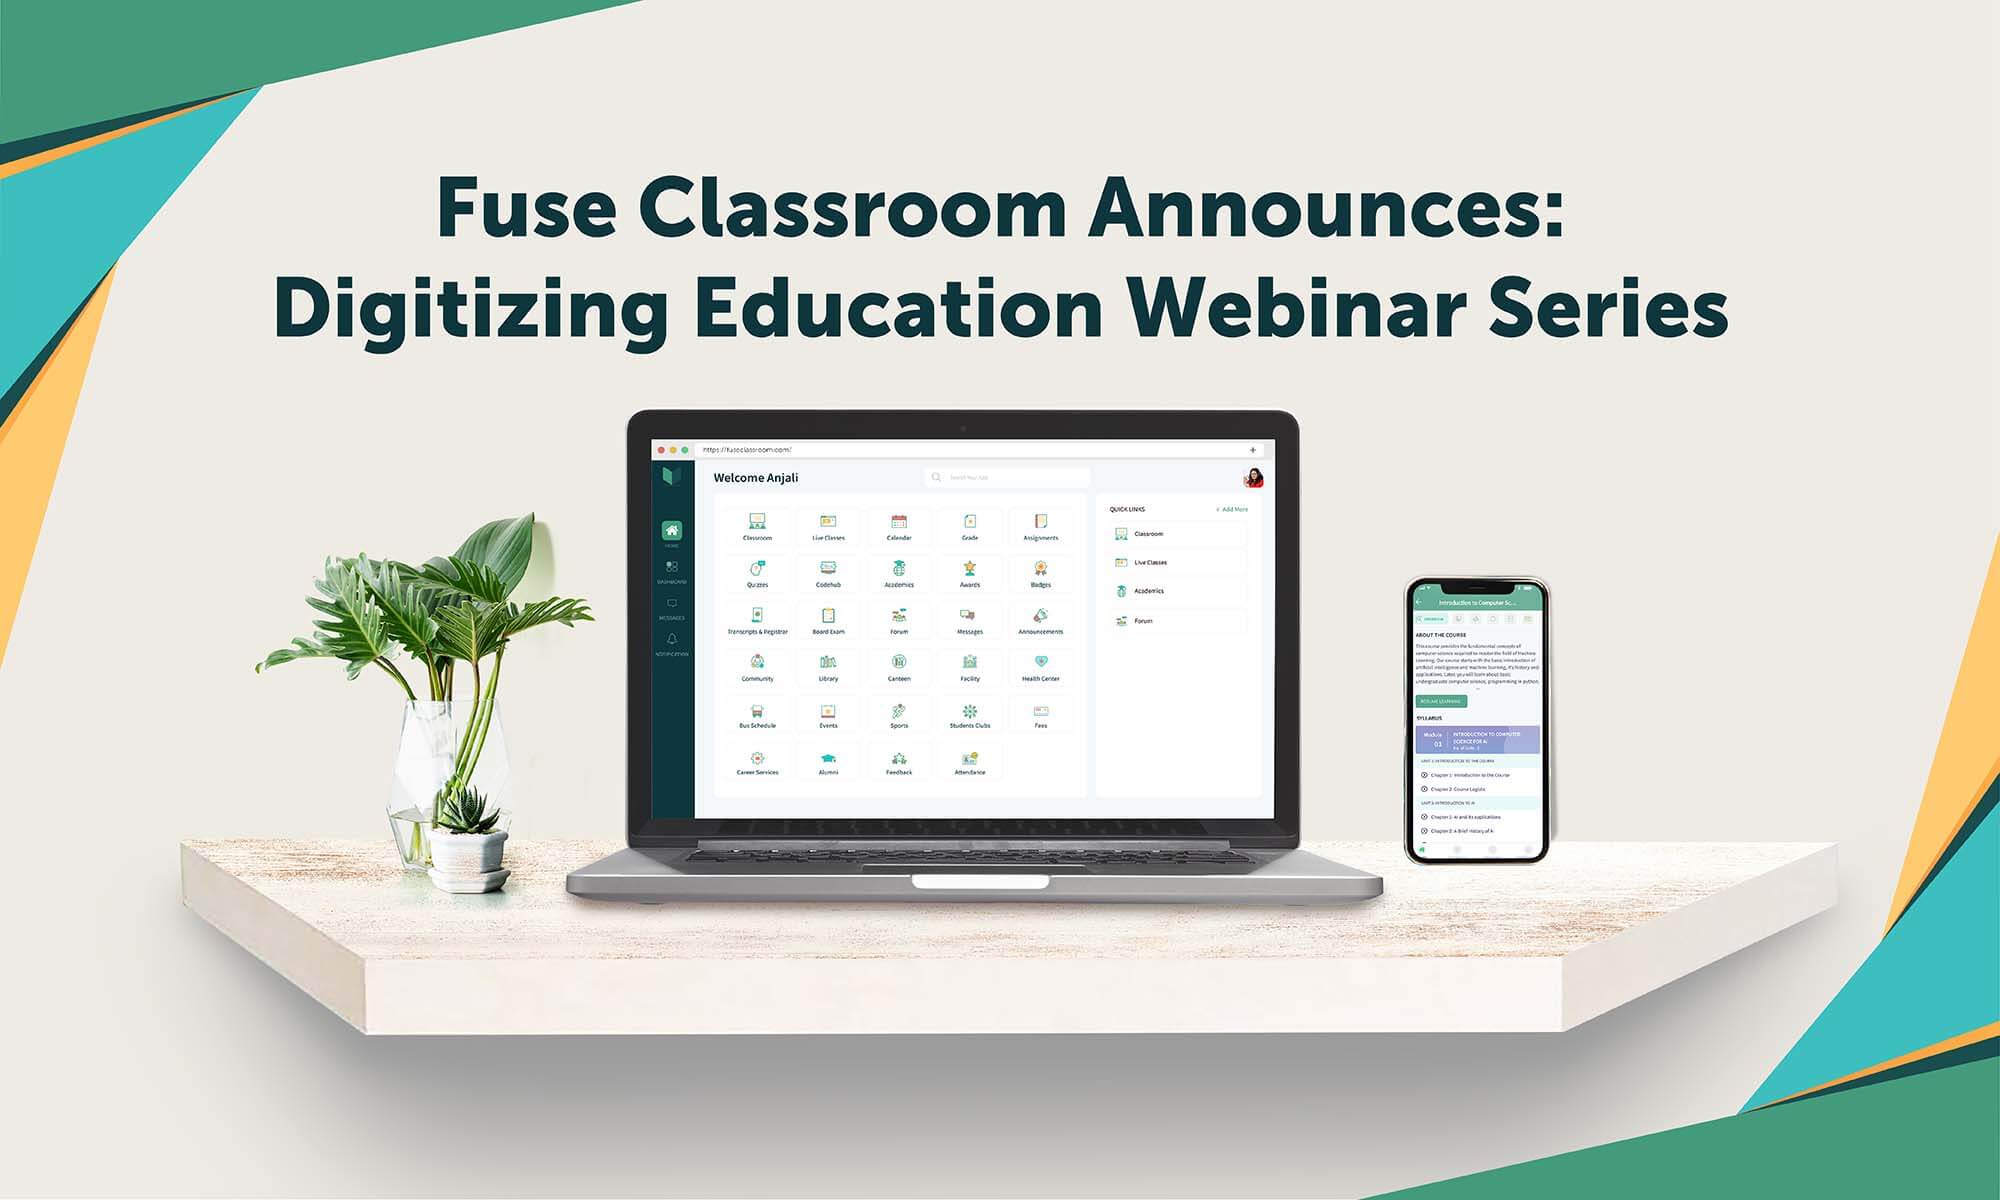 Laptop and phone view of Fuse Classroom with 'Fuse Classroom Announces: Digitizing Education Webinar Series' title